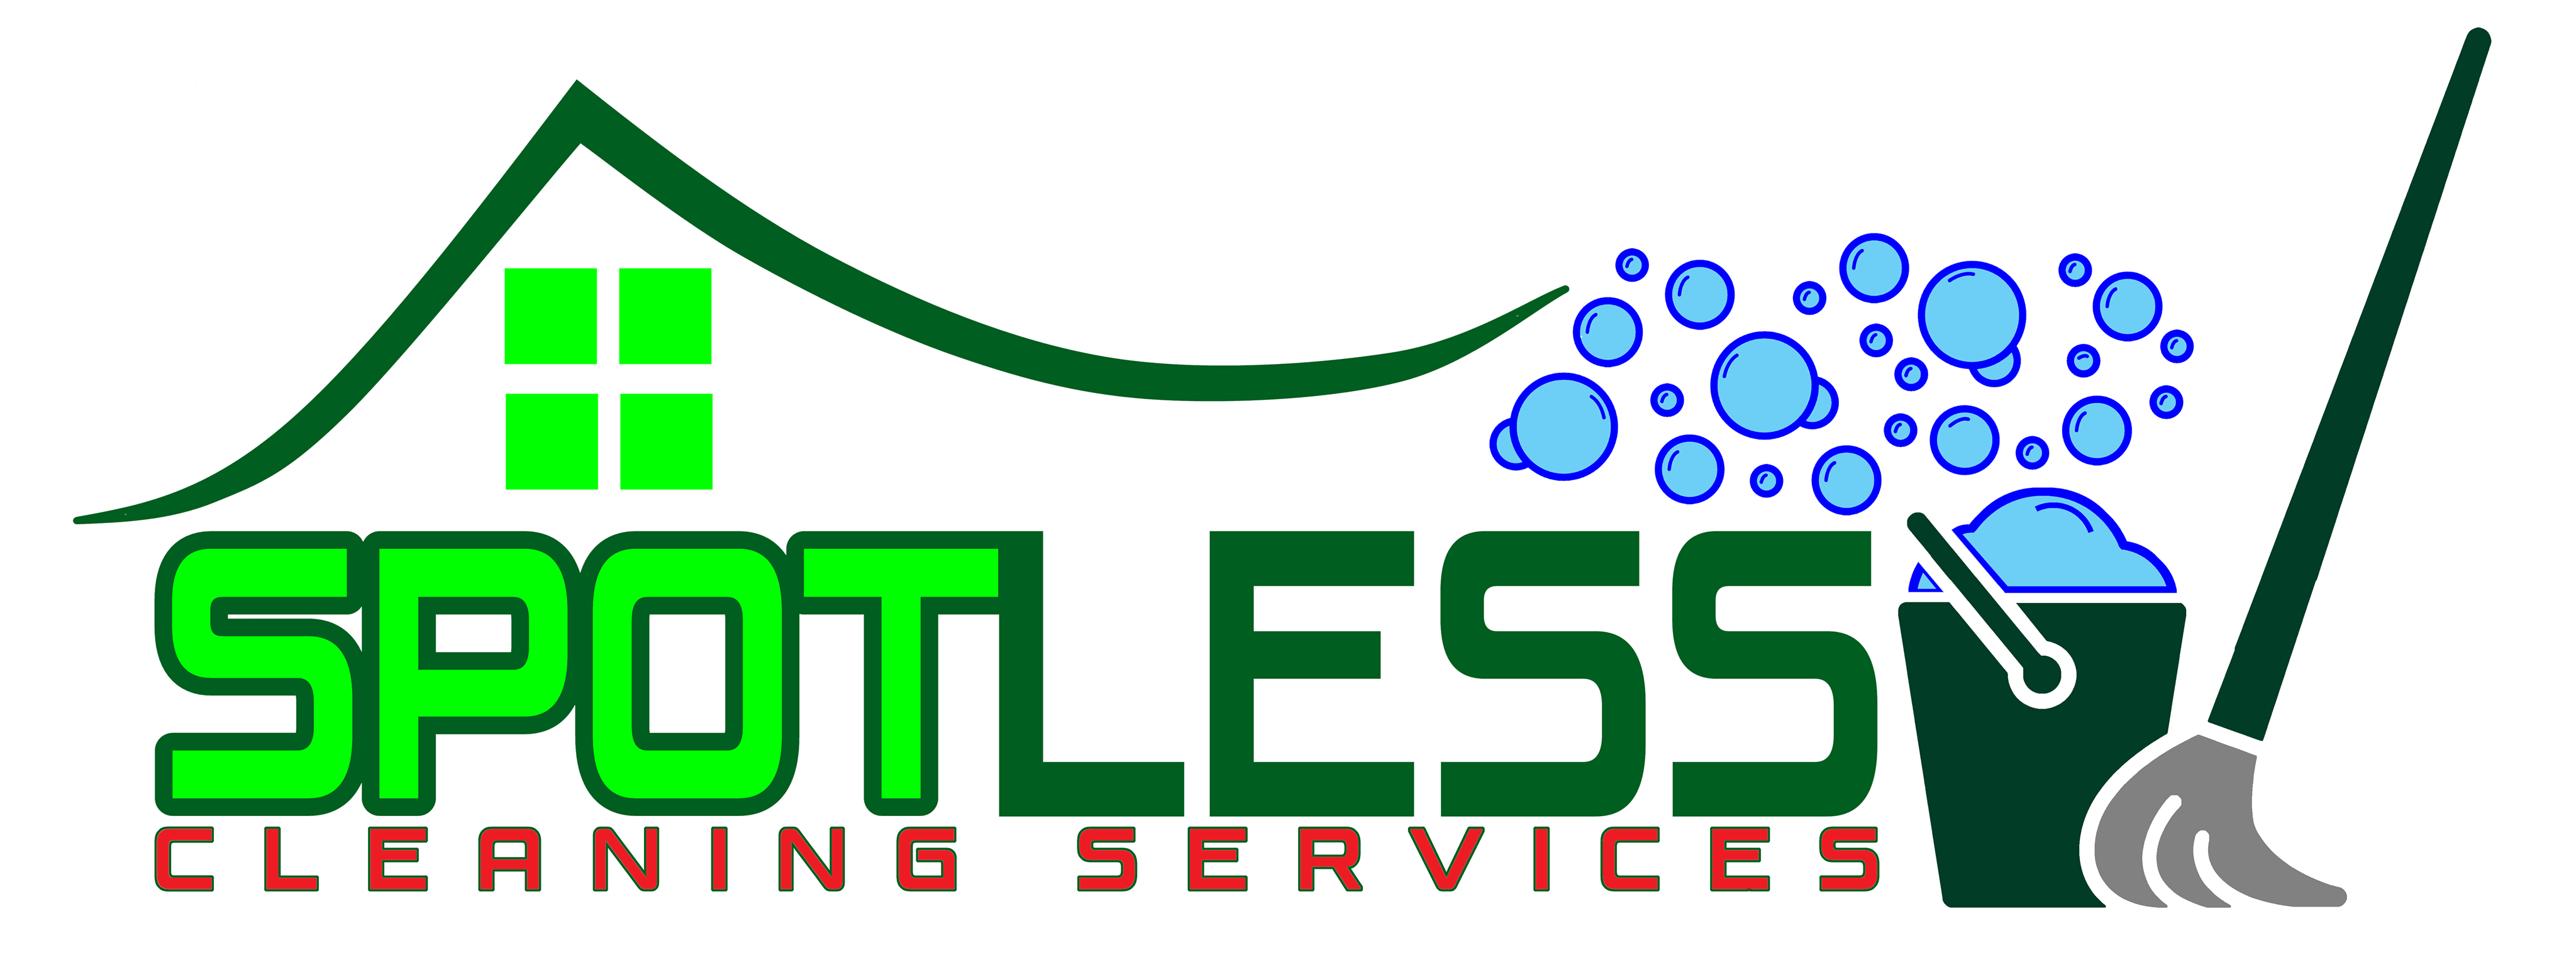 SpotLess Cleaning Services Logo